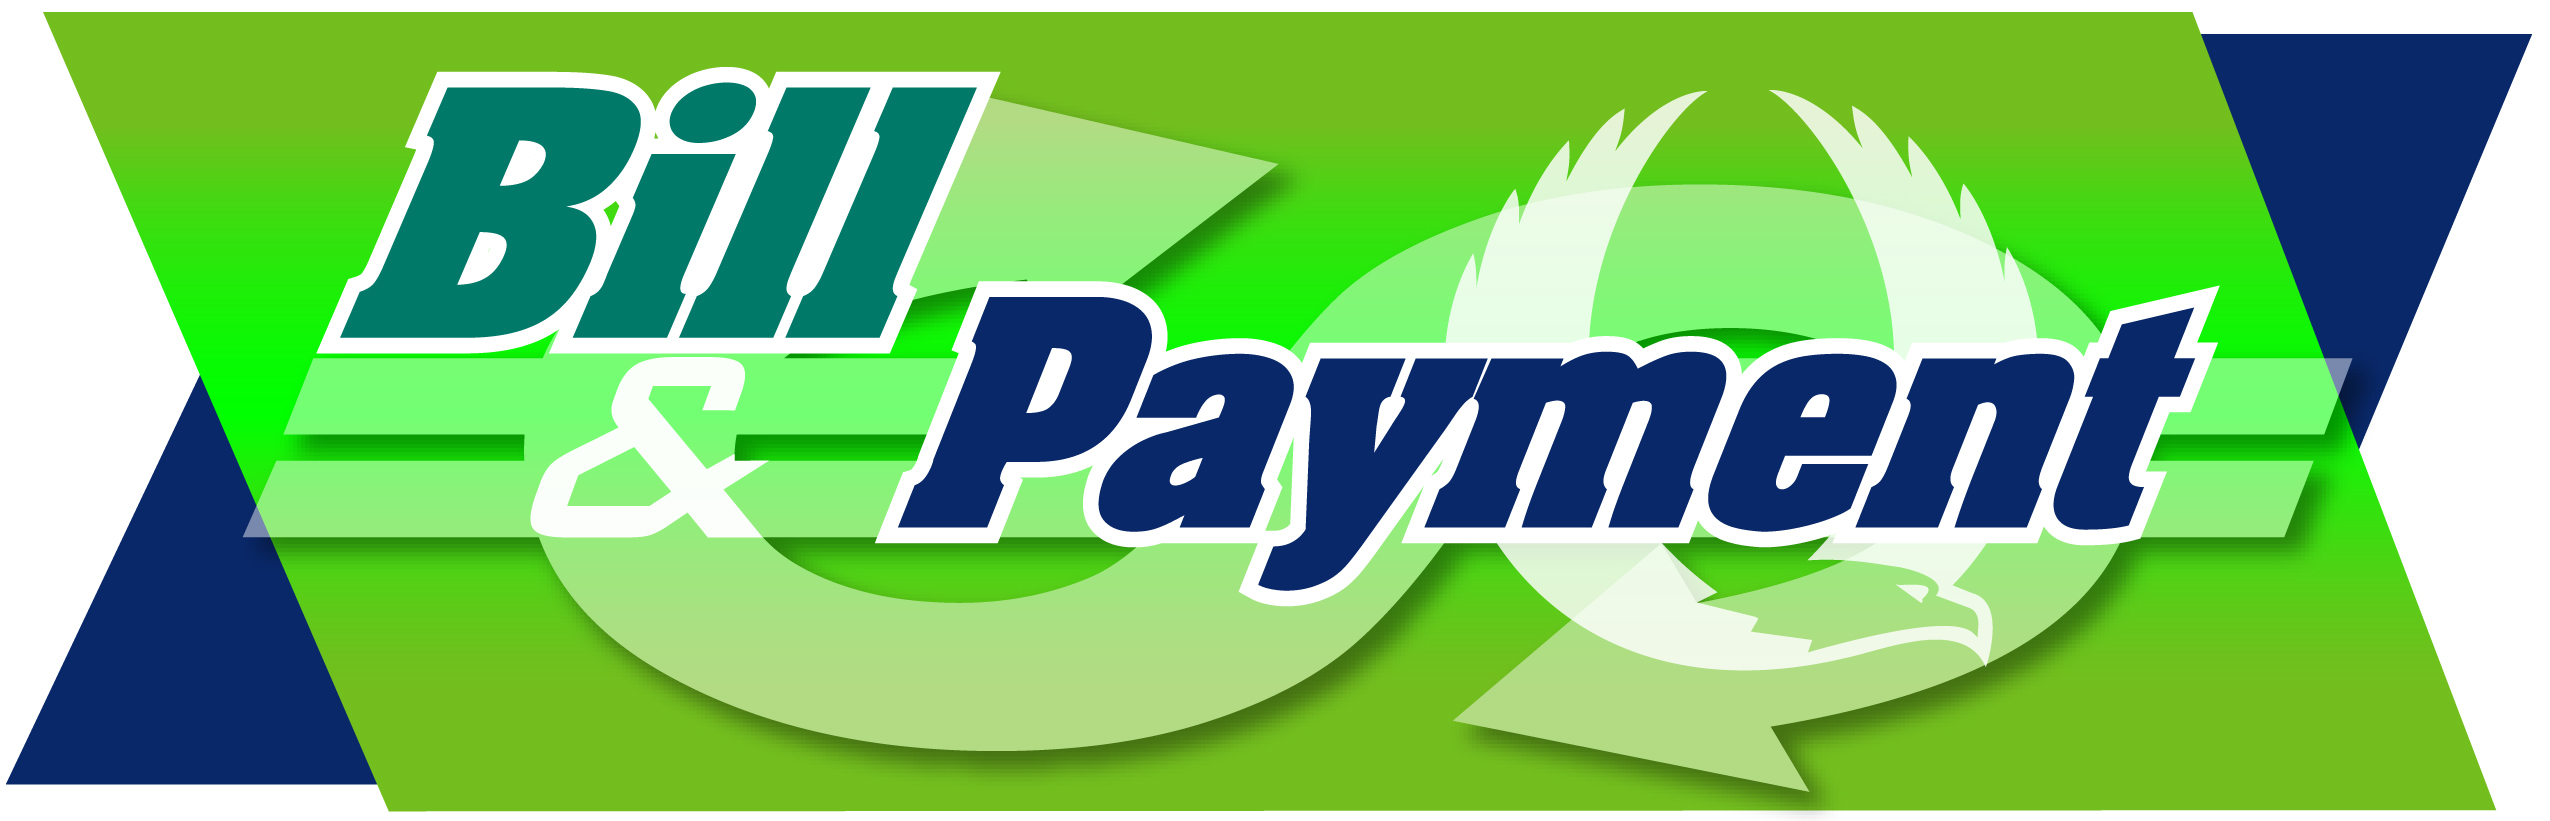 this icon or logo payment icon or other where it explains the means of  payment, bill